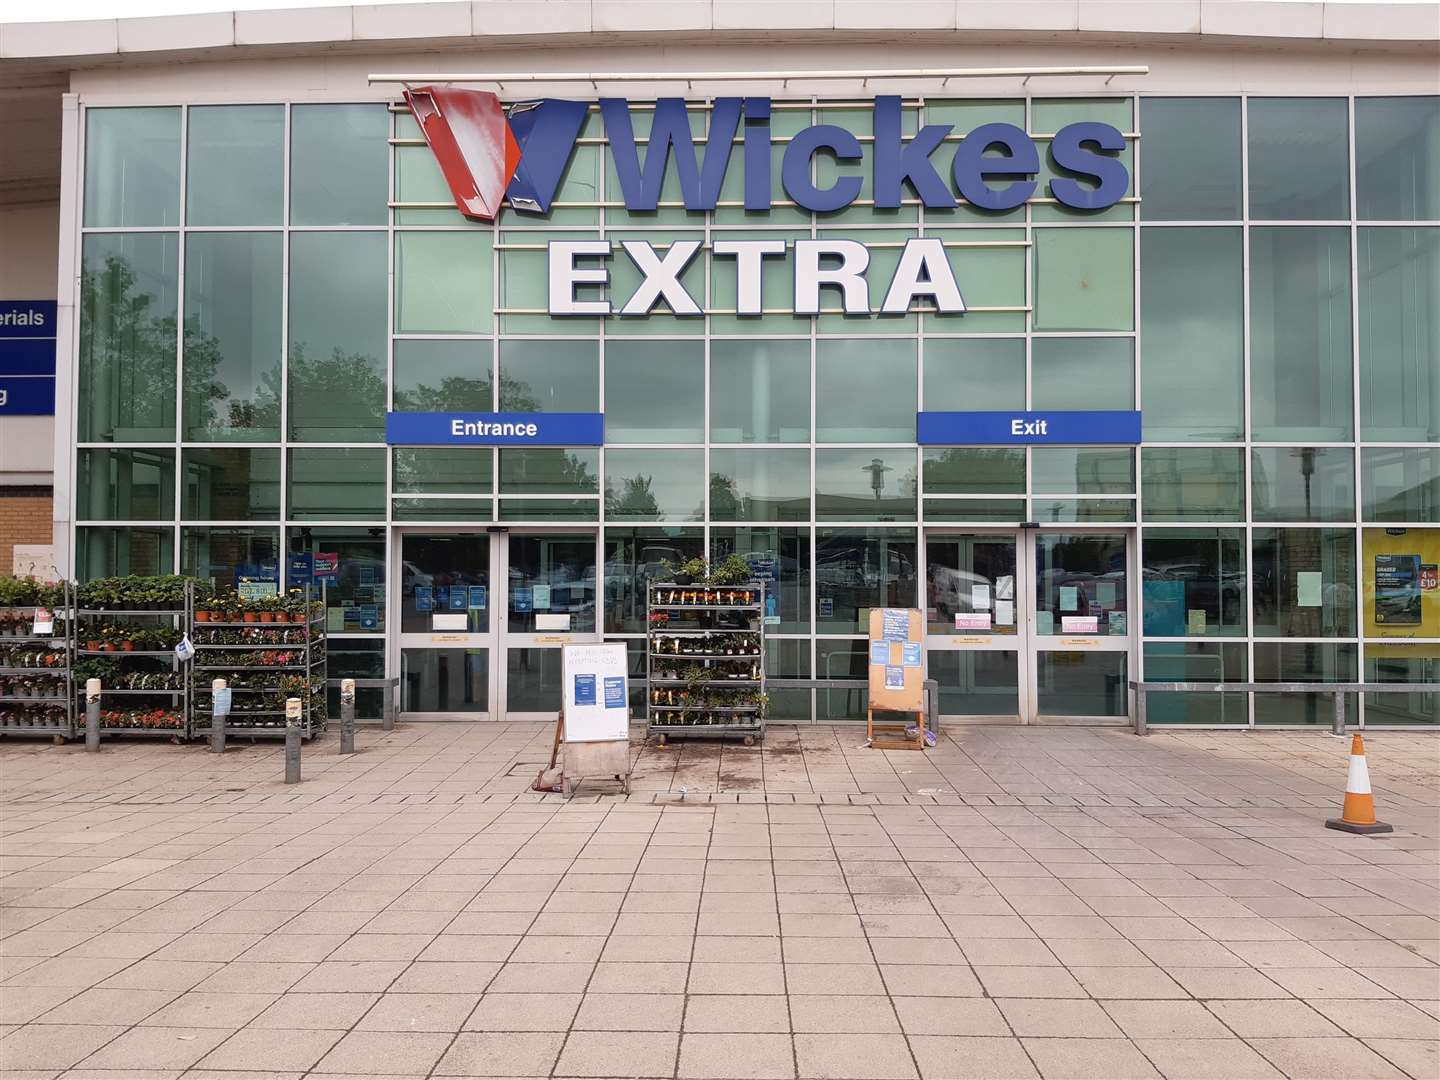 The existing Wickes store in Maidstone